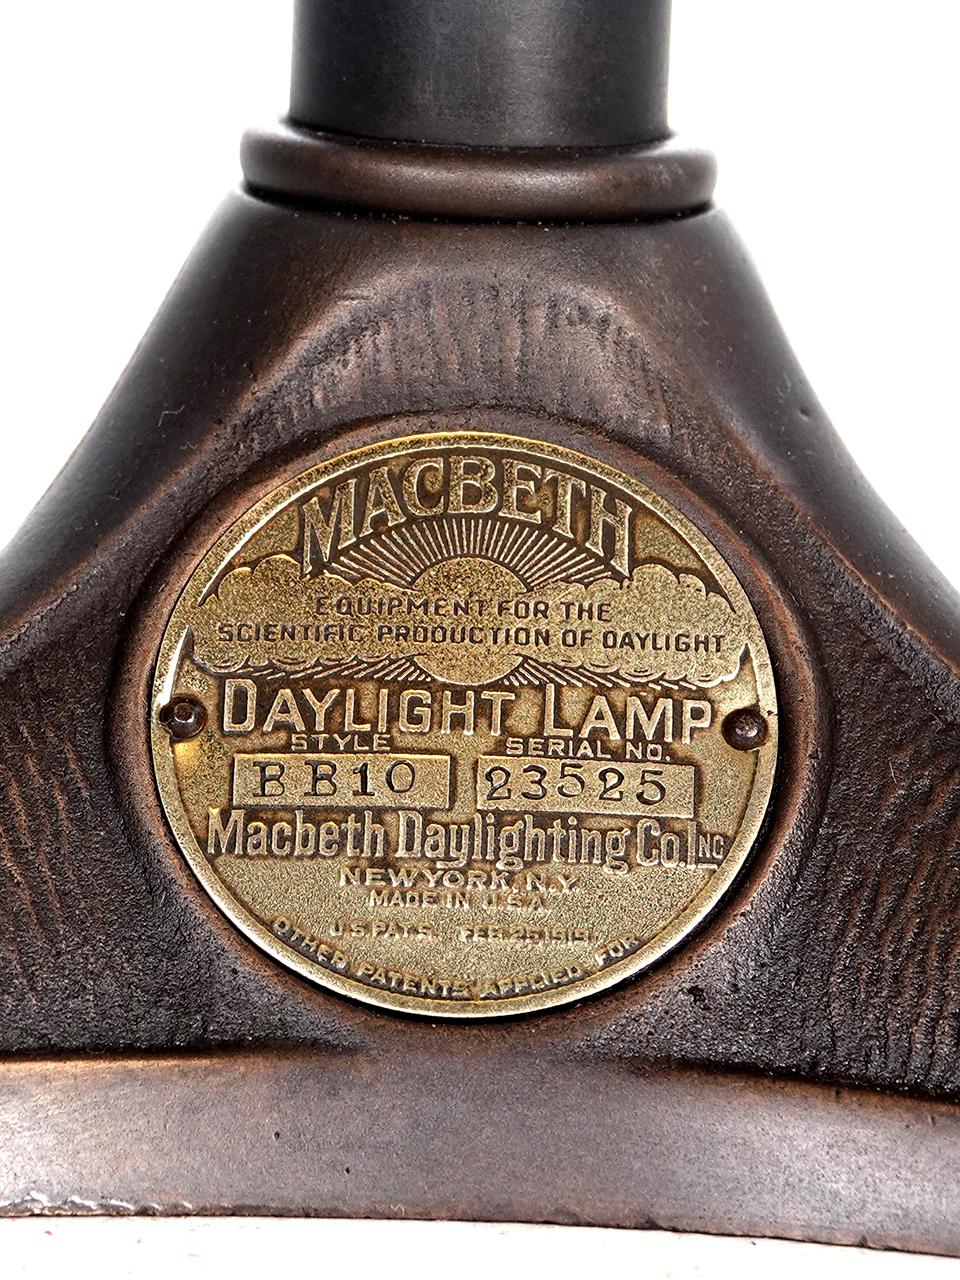 This is a very rare table lamp. You would be surprised at the original cost for of this fixture. Its signed Macbeth Daylight. Macbeth was and still is one of the leaders in industrial standard lighting. This type of fixture would provide consistent